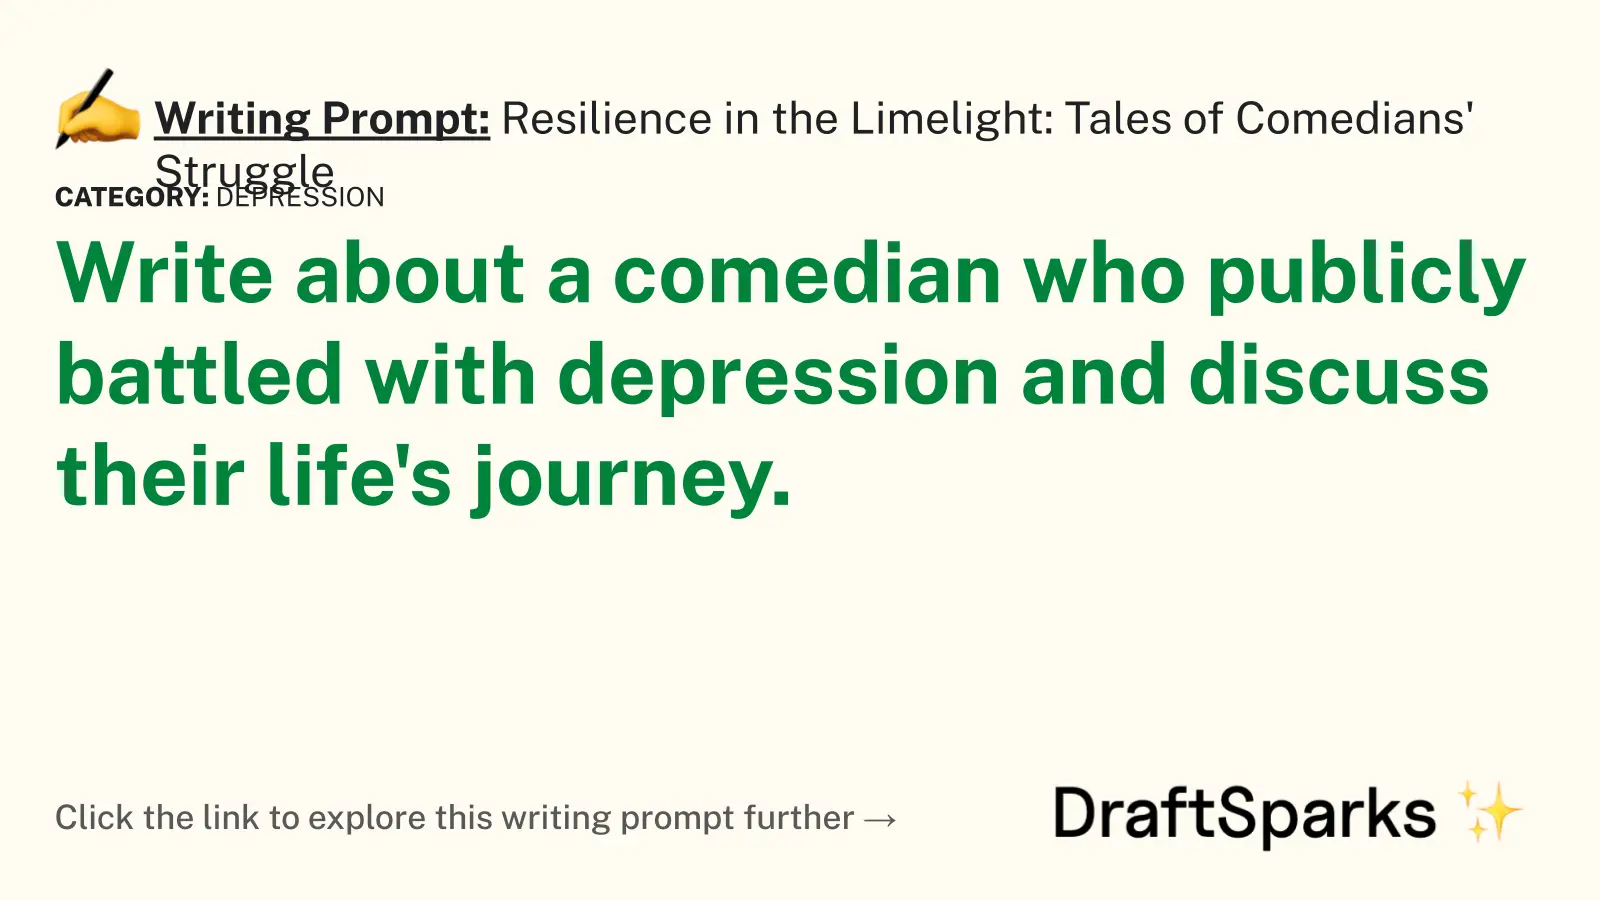 Resilience in the Limelight: Tales of Comedians’ Struggle